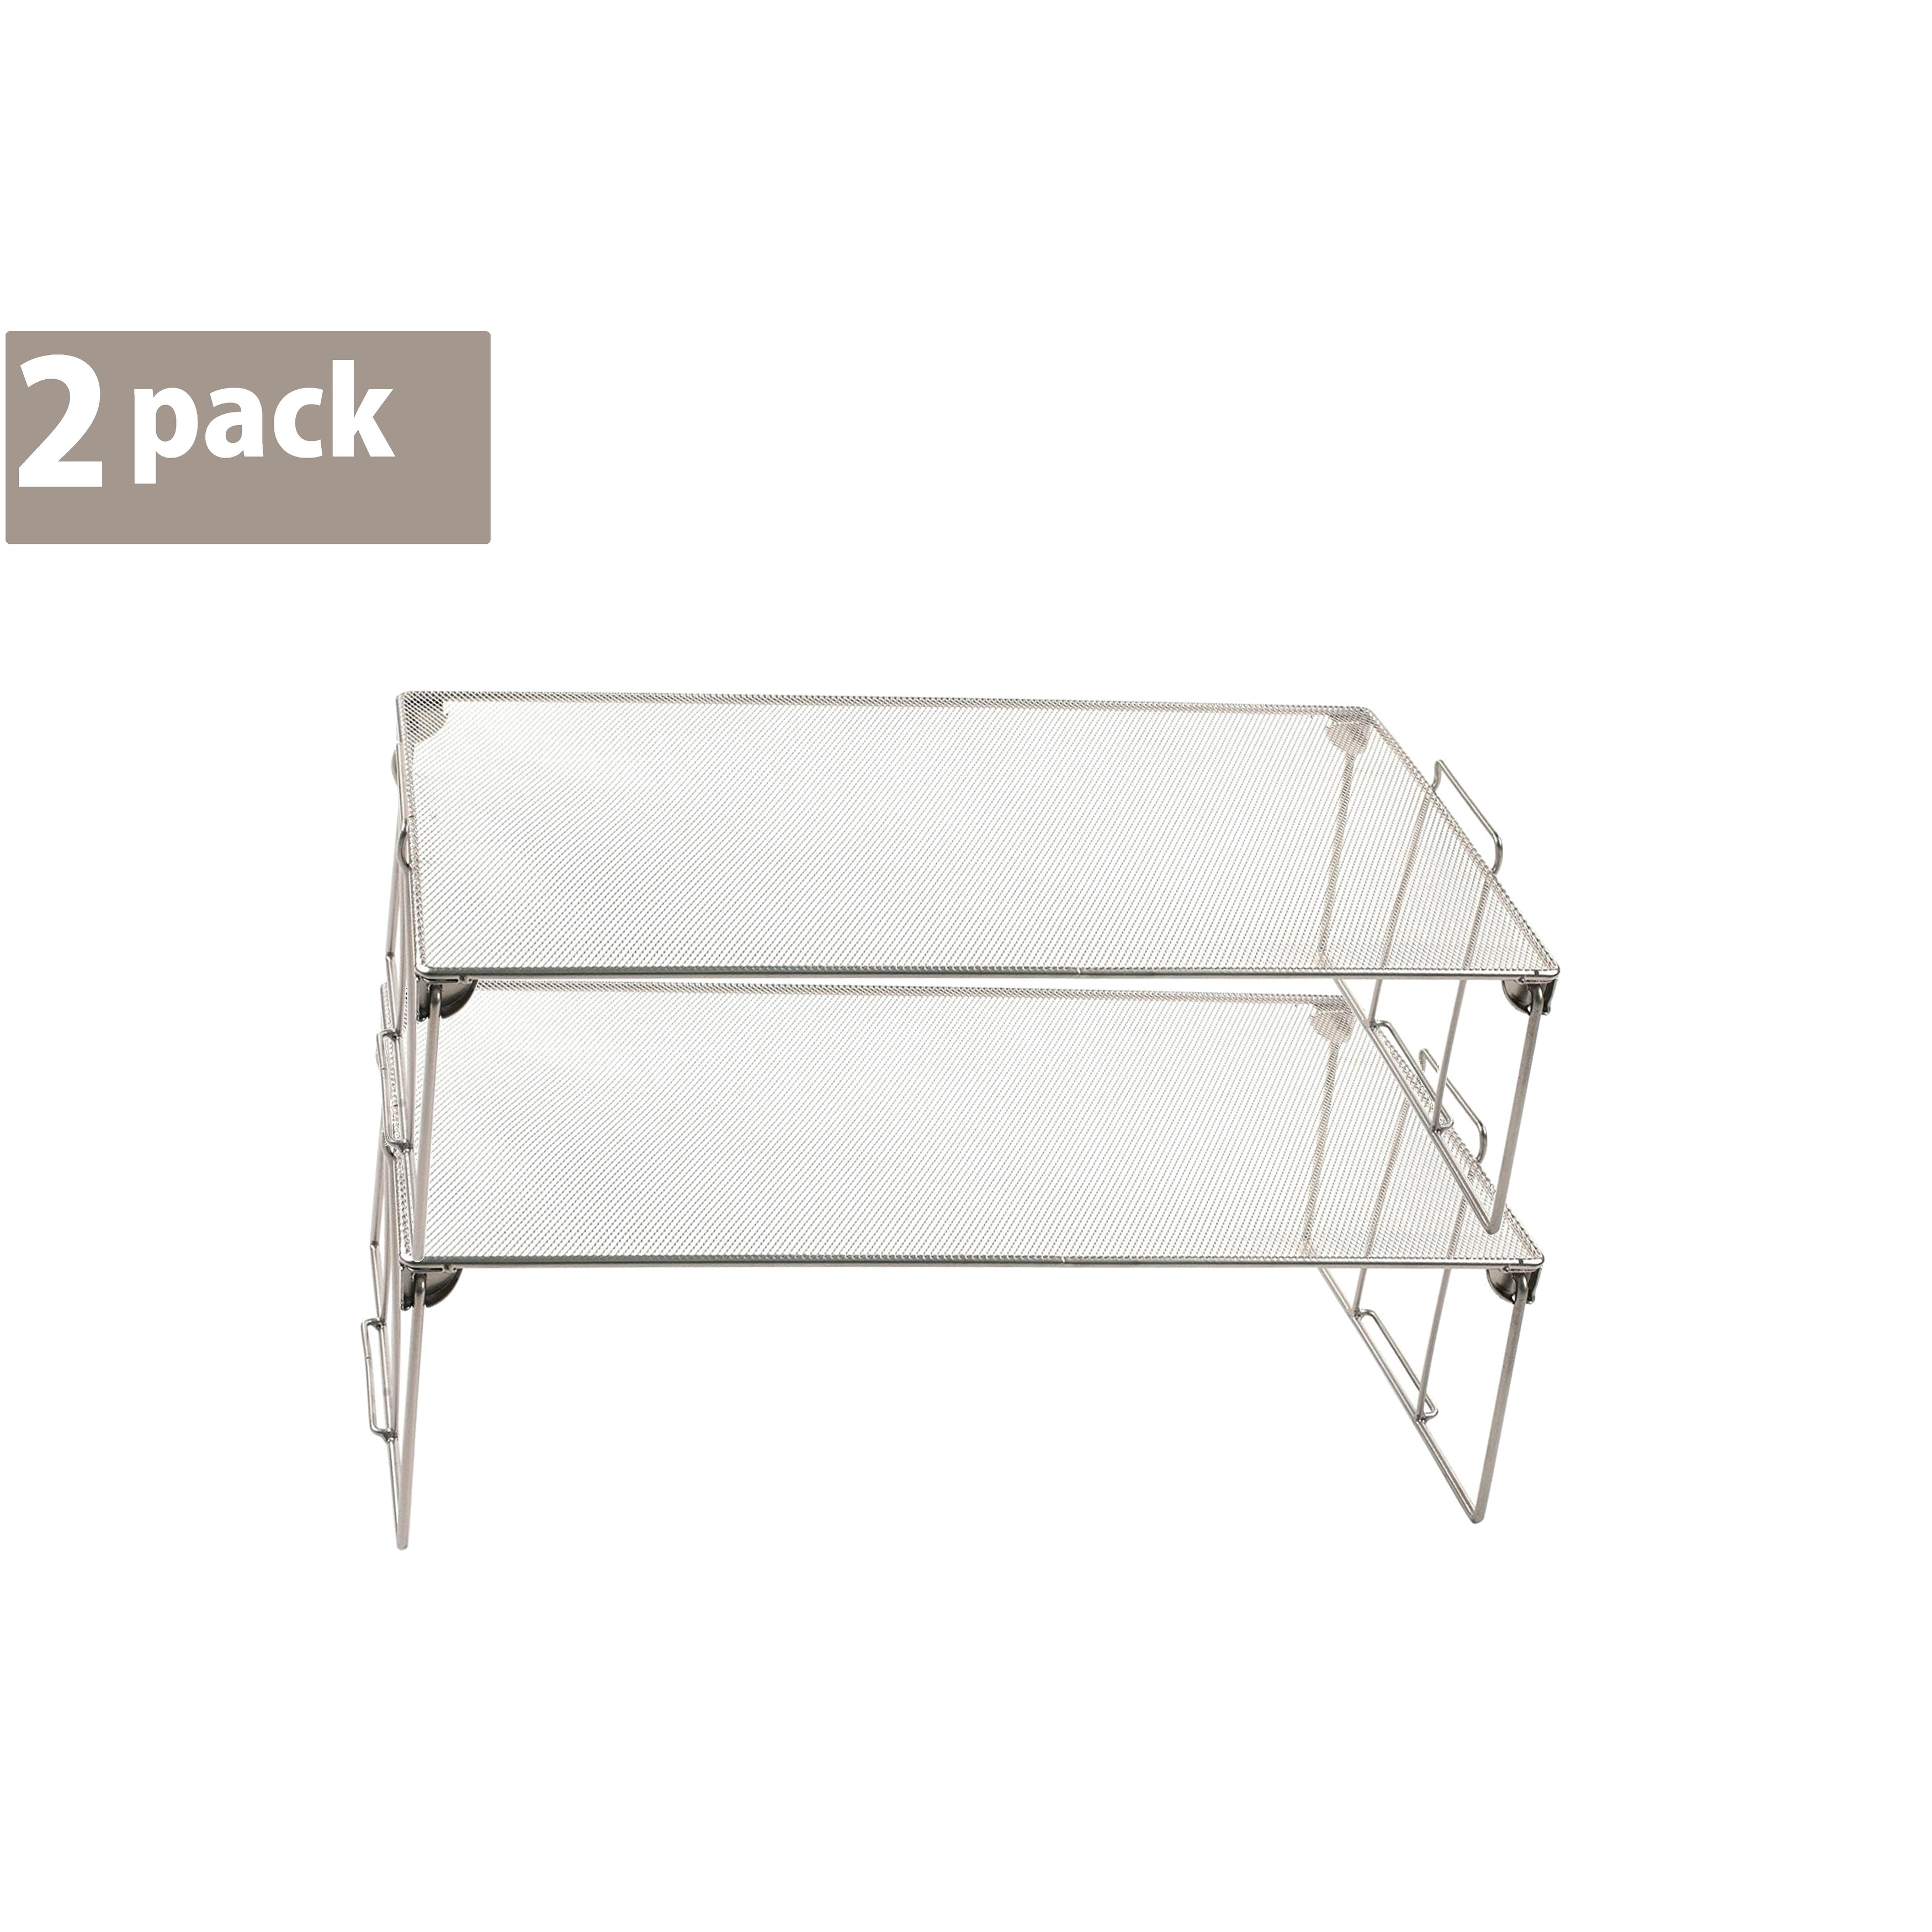 https://ak1.ostkcdn.com/images/products/23387641/Ybm-Home-Stackable-Mesh-Shelf-Silver-Storage-Rack-for-Kitchen-Office-Wire-Organizer-16.25-In.-L-x-10-In.-W-x-5-In.-H-2-Pack-e7f3dfdf-837a-4fb7-aec6-f429ffdcbaf5.jpg